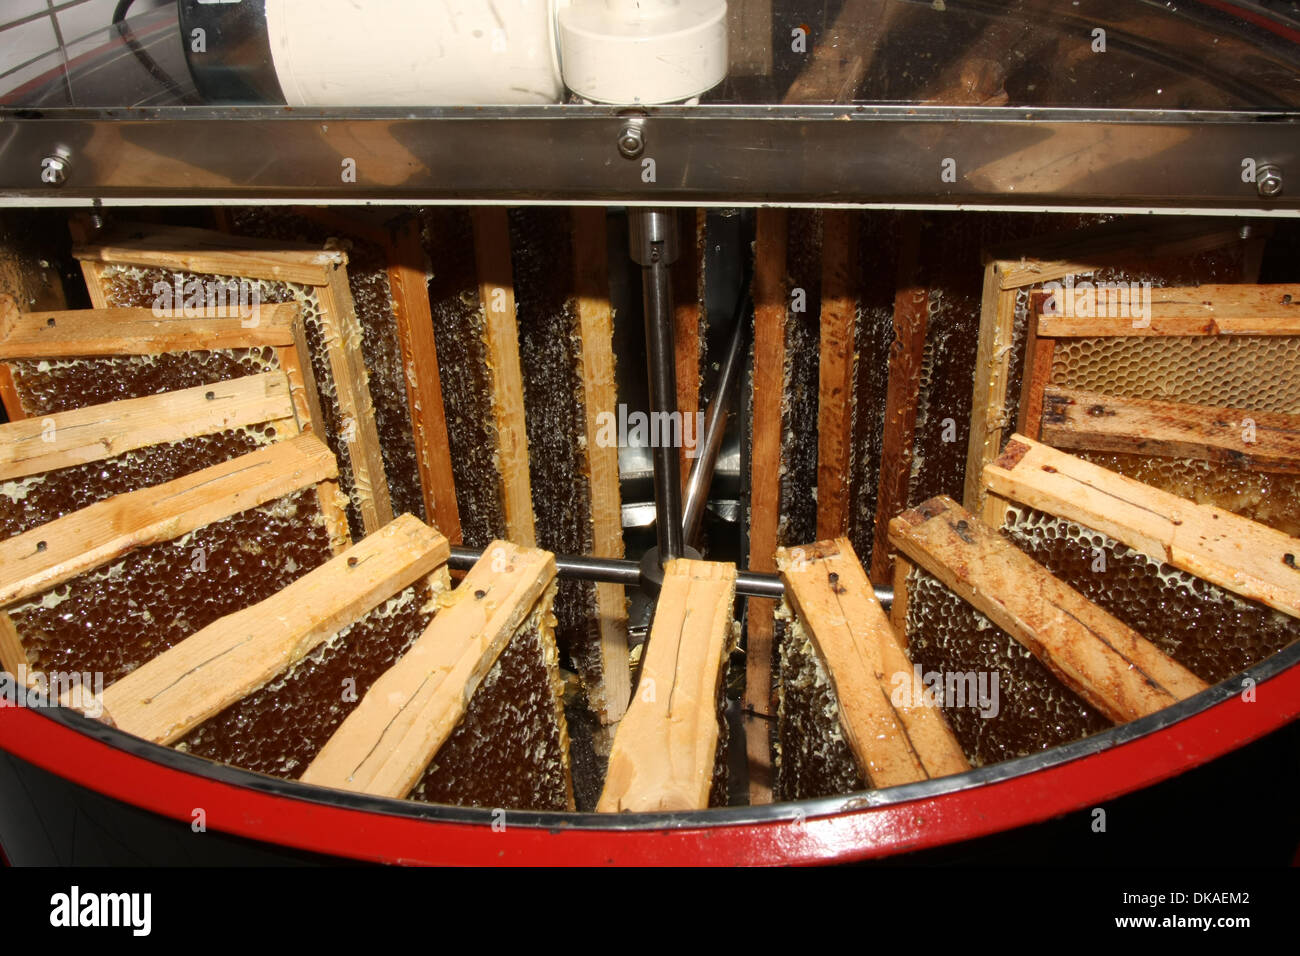 This radial honey extractor hold 20 honeycombs. With this system, the honey is removed from the combs by the centrifugal force and the vacuum in the extractor. Photo: Klaus Nowottnick Date: June 16, 2011 Stock Photo